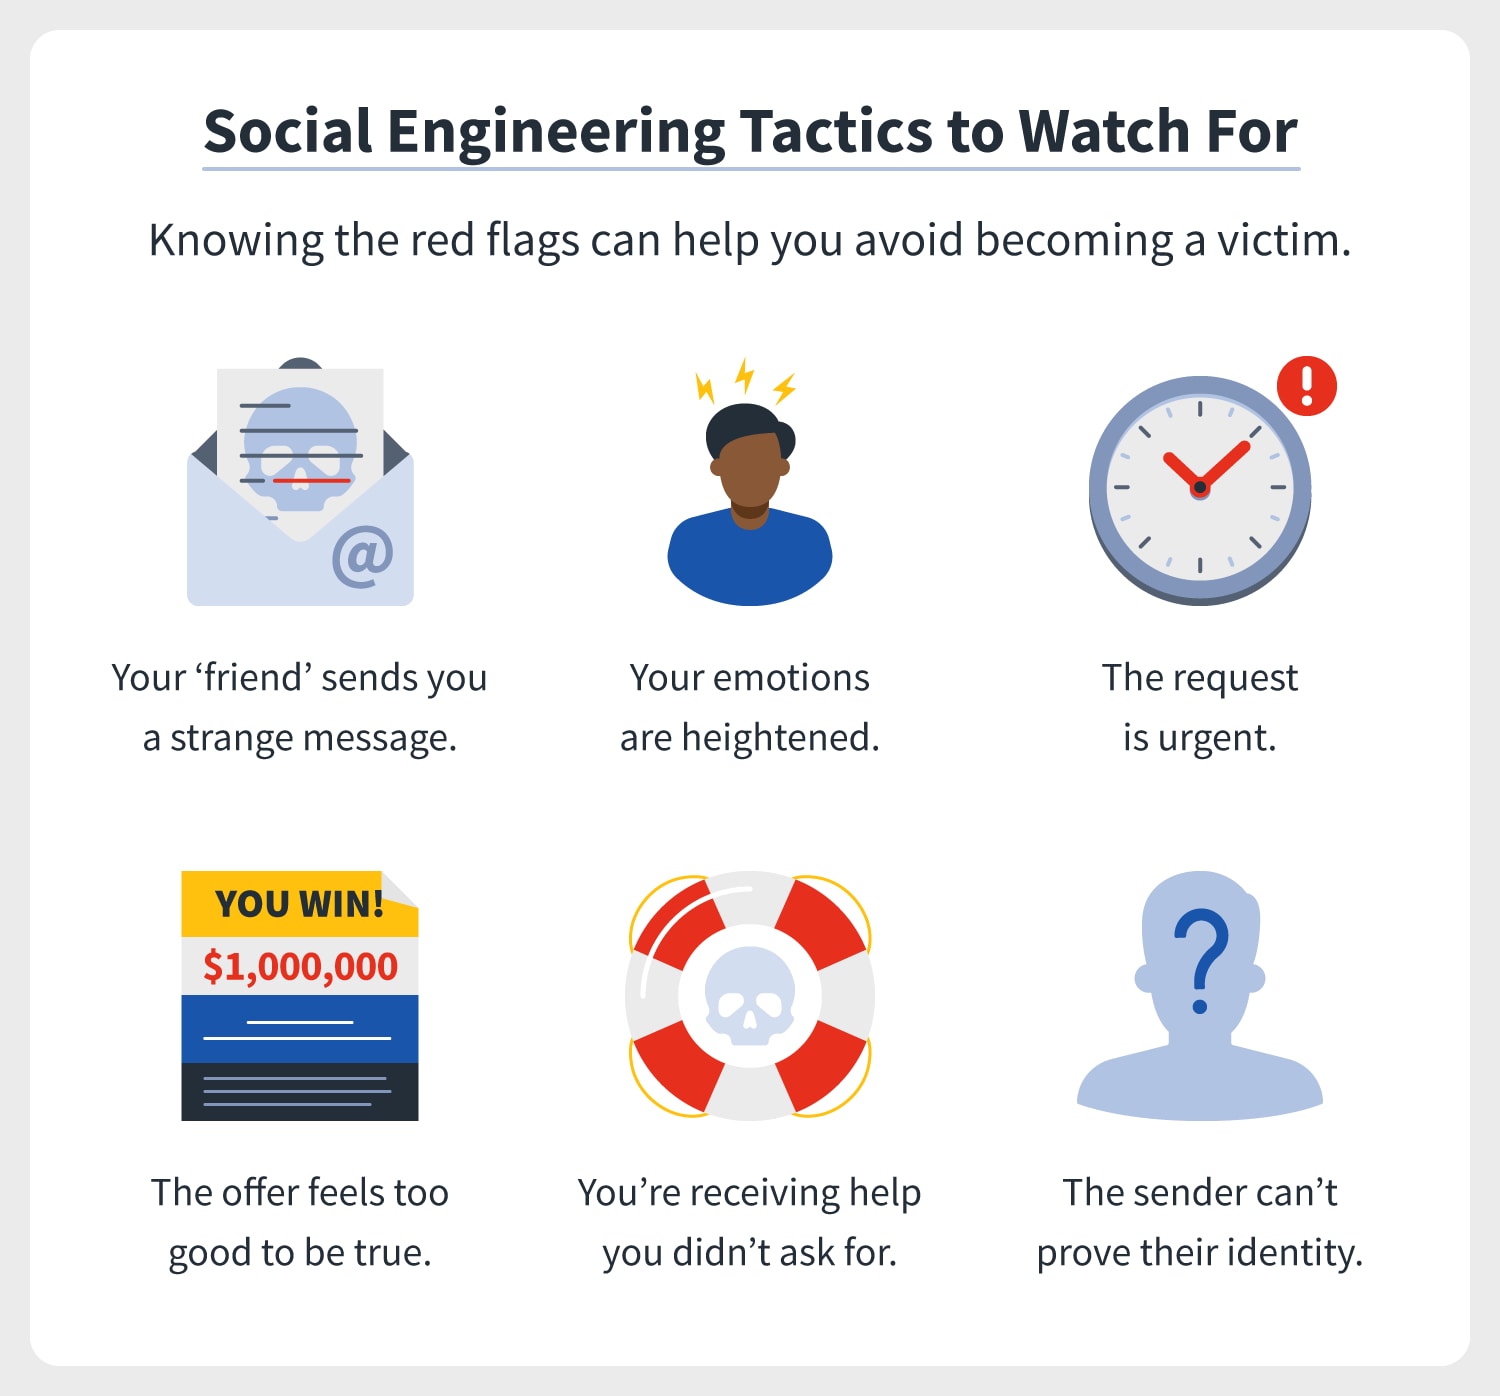 icons represent social engineering tactics to watch for, including urgent requests, heightened emotions, and fake offers